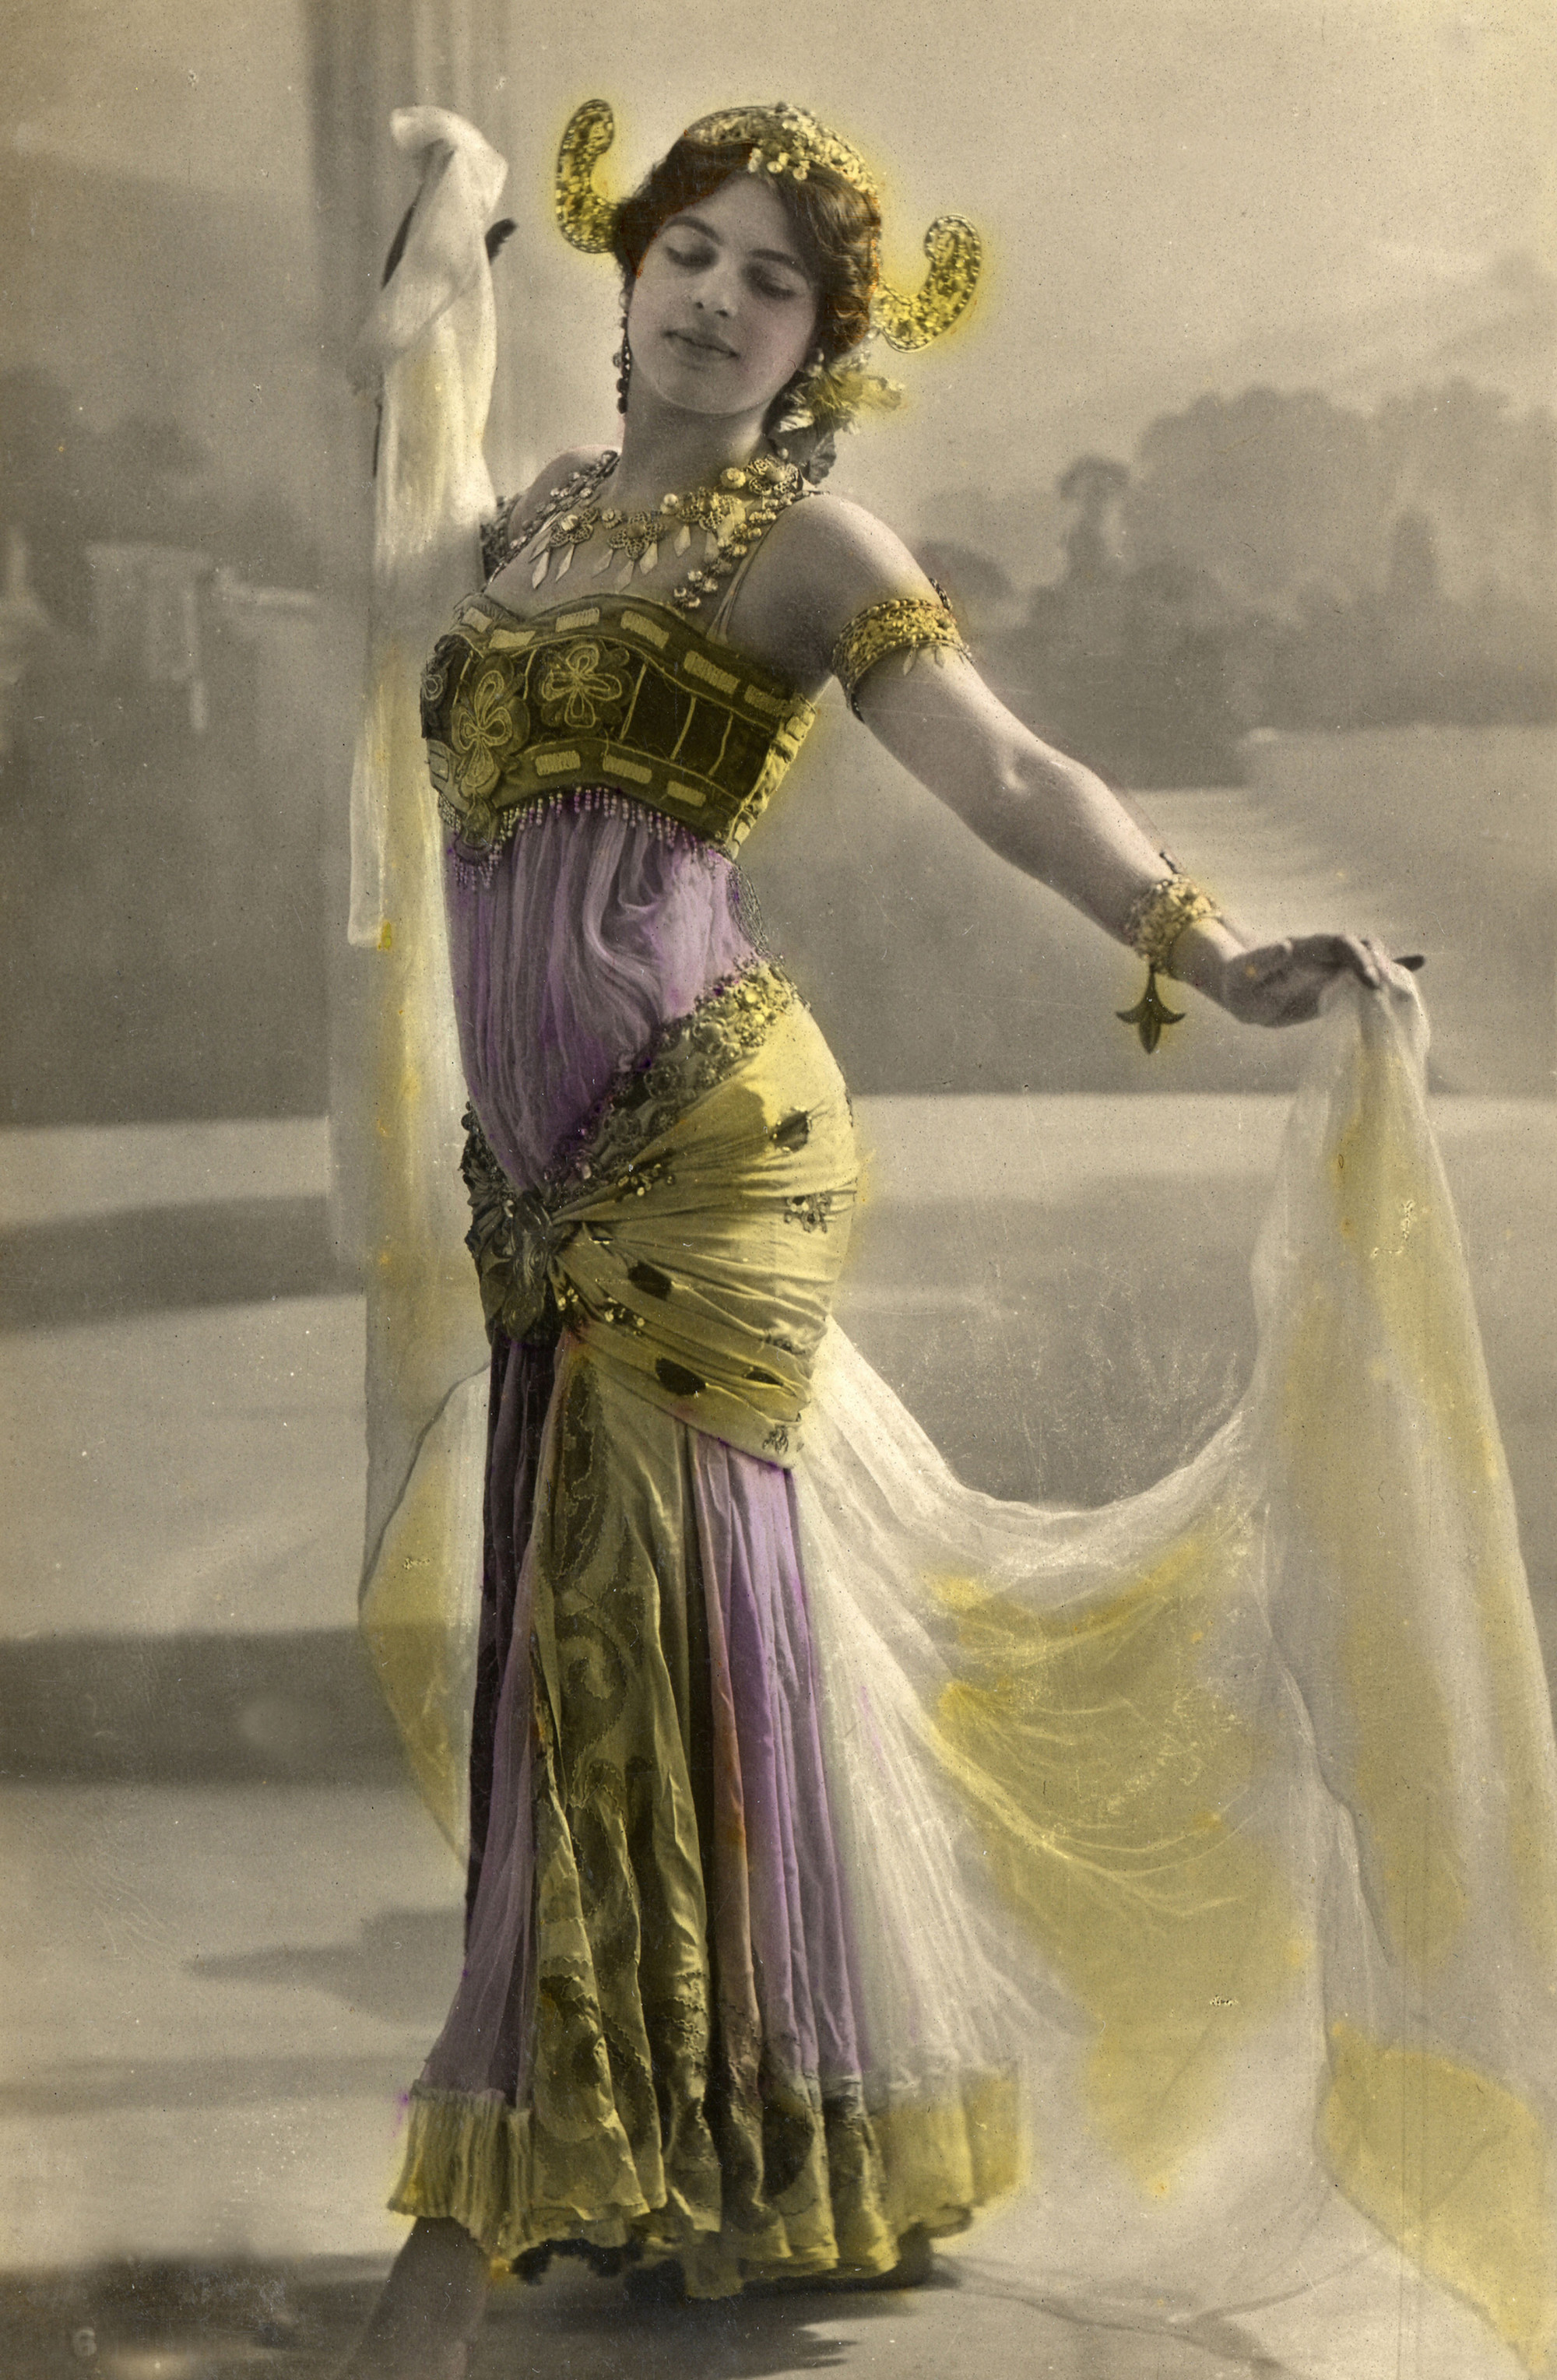 Mata Hari In Photos: The Ultimate Femme Fatale and Woman of Courage - Flashbak